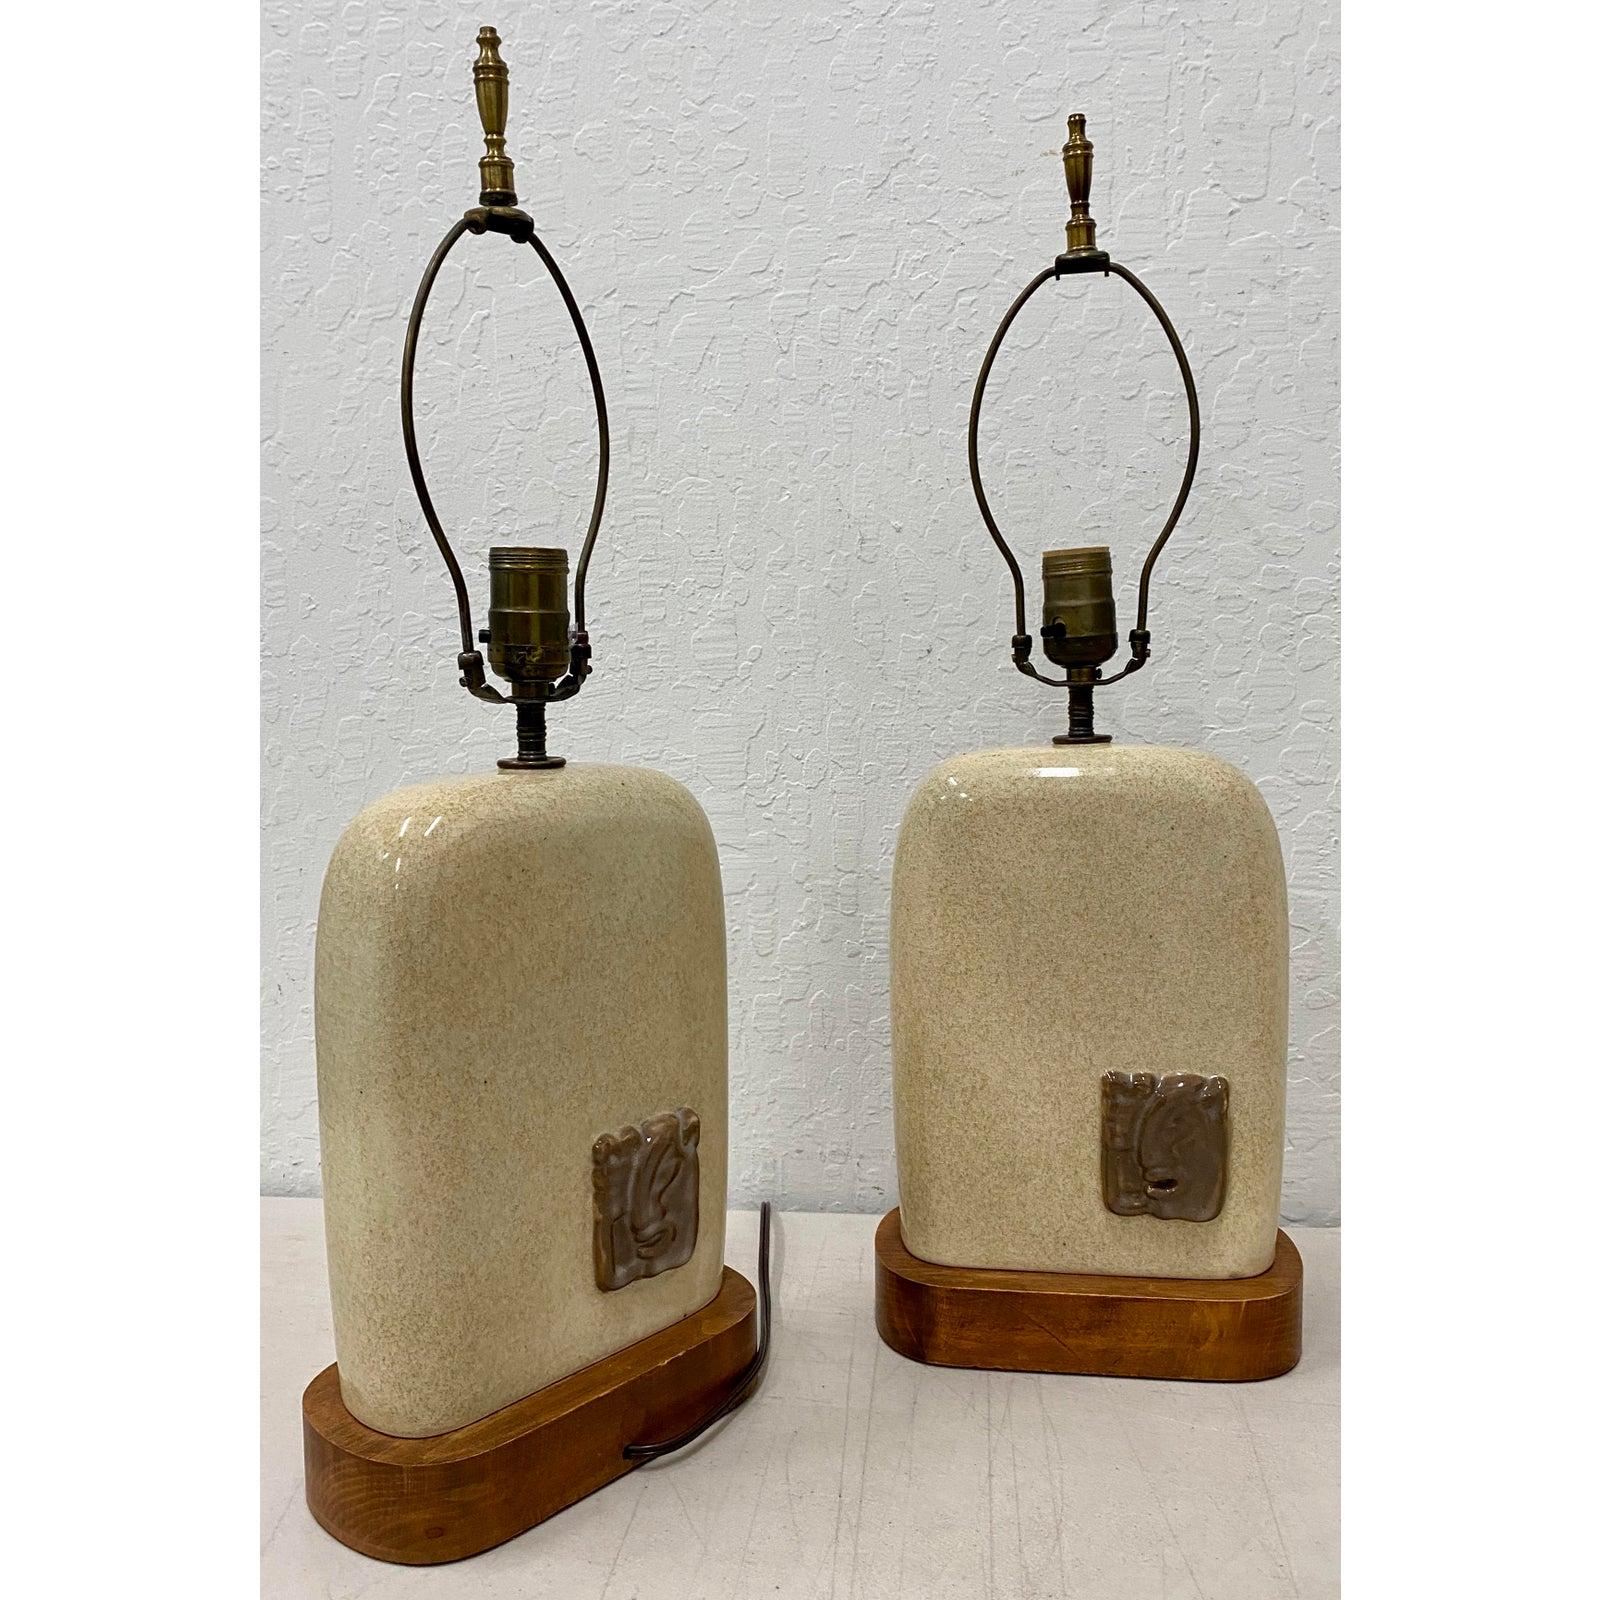 American Pair of Vintage Glazed Ceramic Lamps with Mayan Inspired Ceramic Medallions